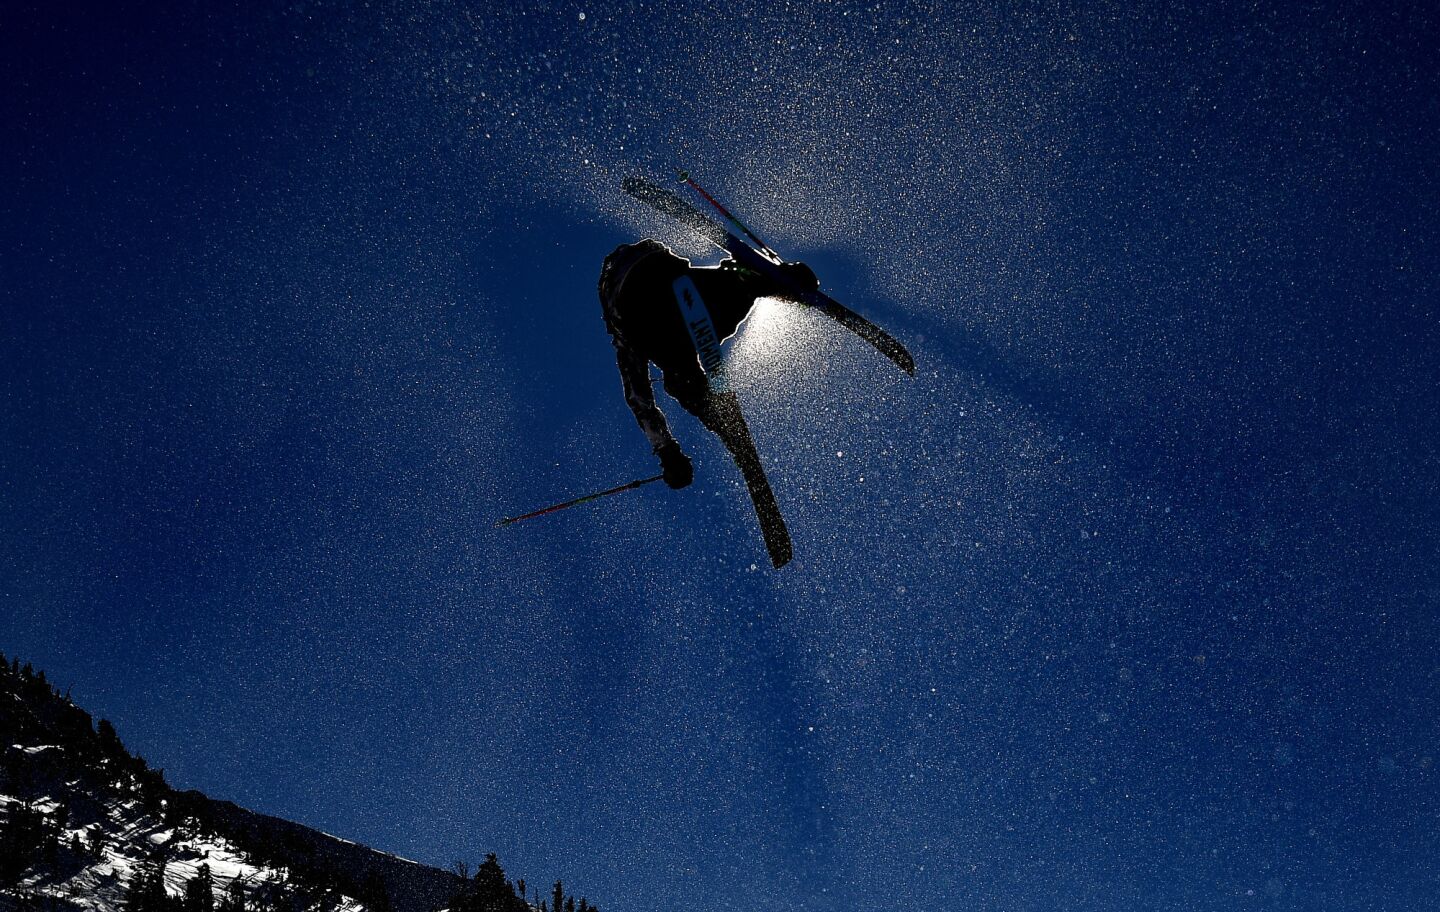 A competitor launches off a ramp during the Men's Slopestyle Qualifier in Mammoth Mountain.